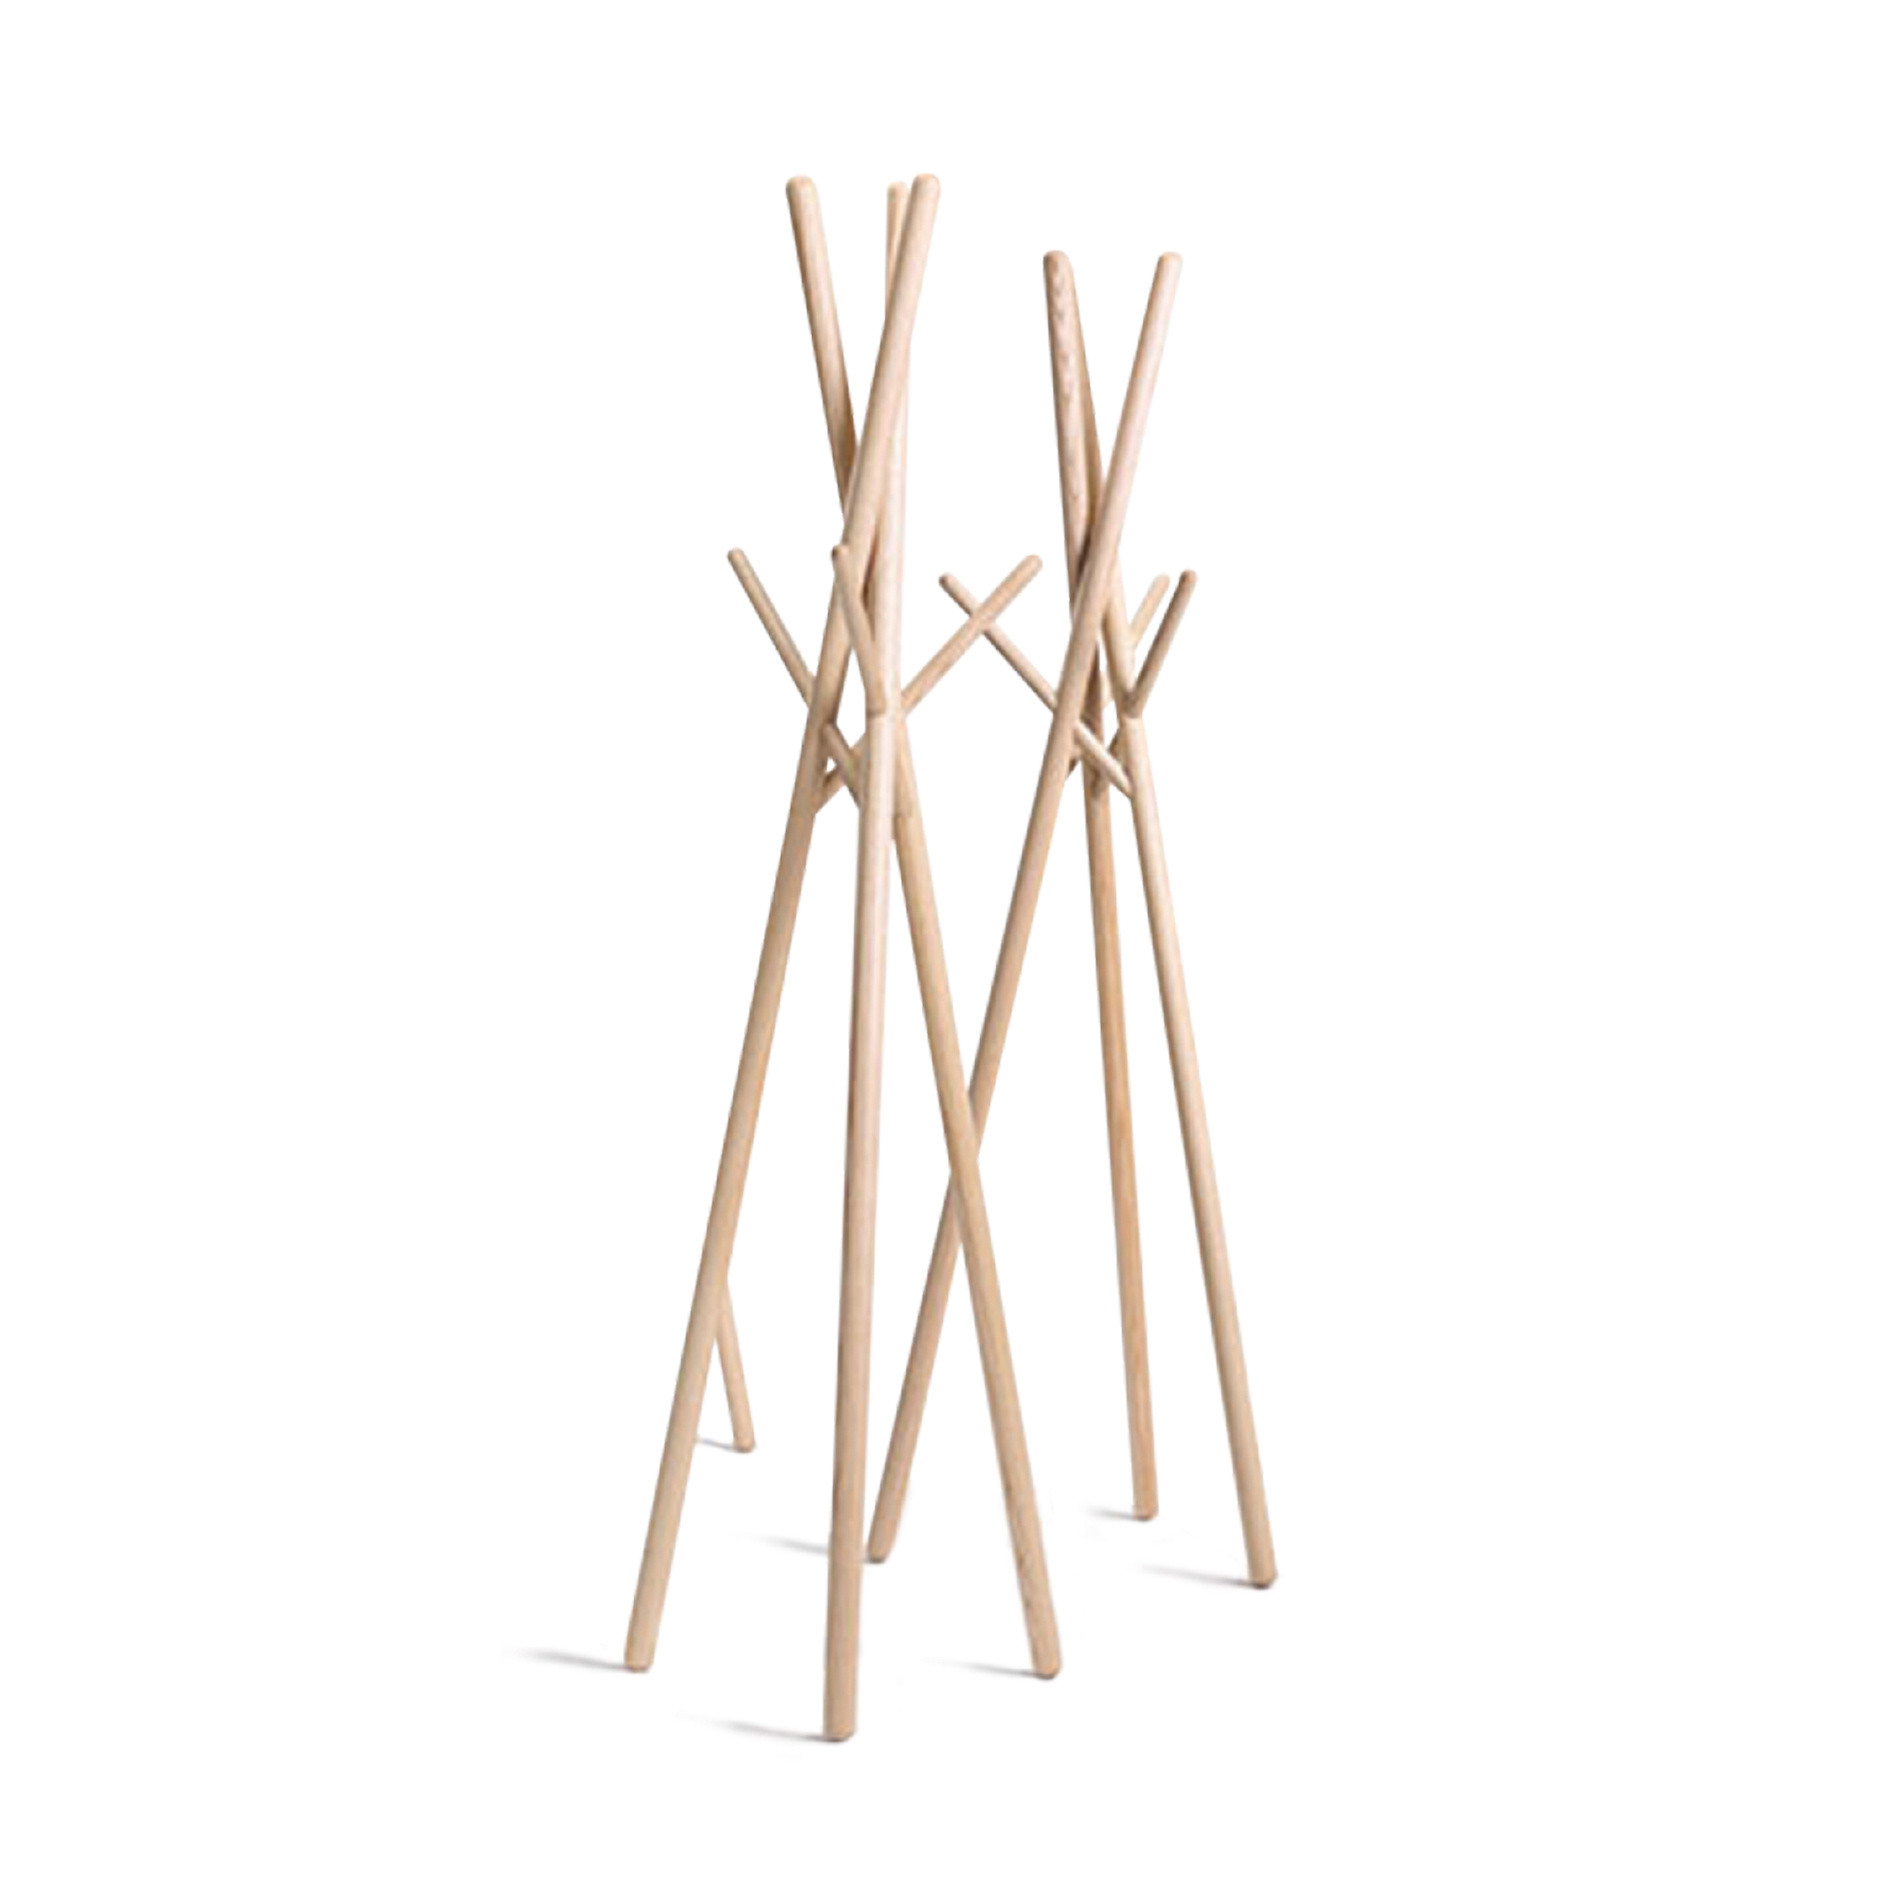 Cargo Play coat Stand, Beige, large image number 0